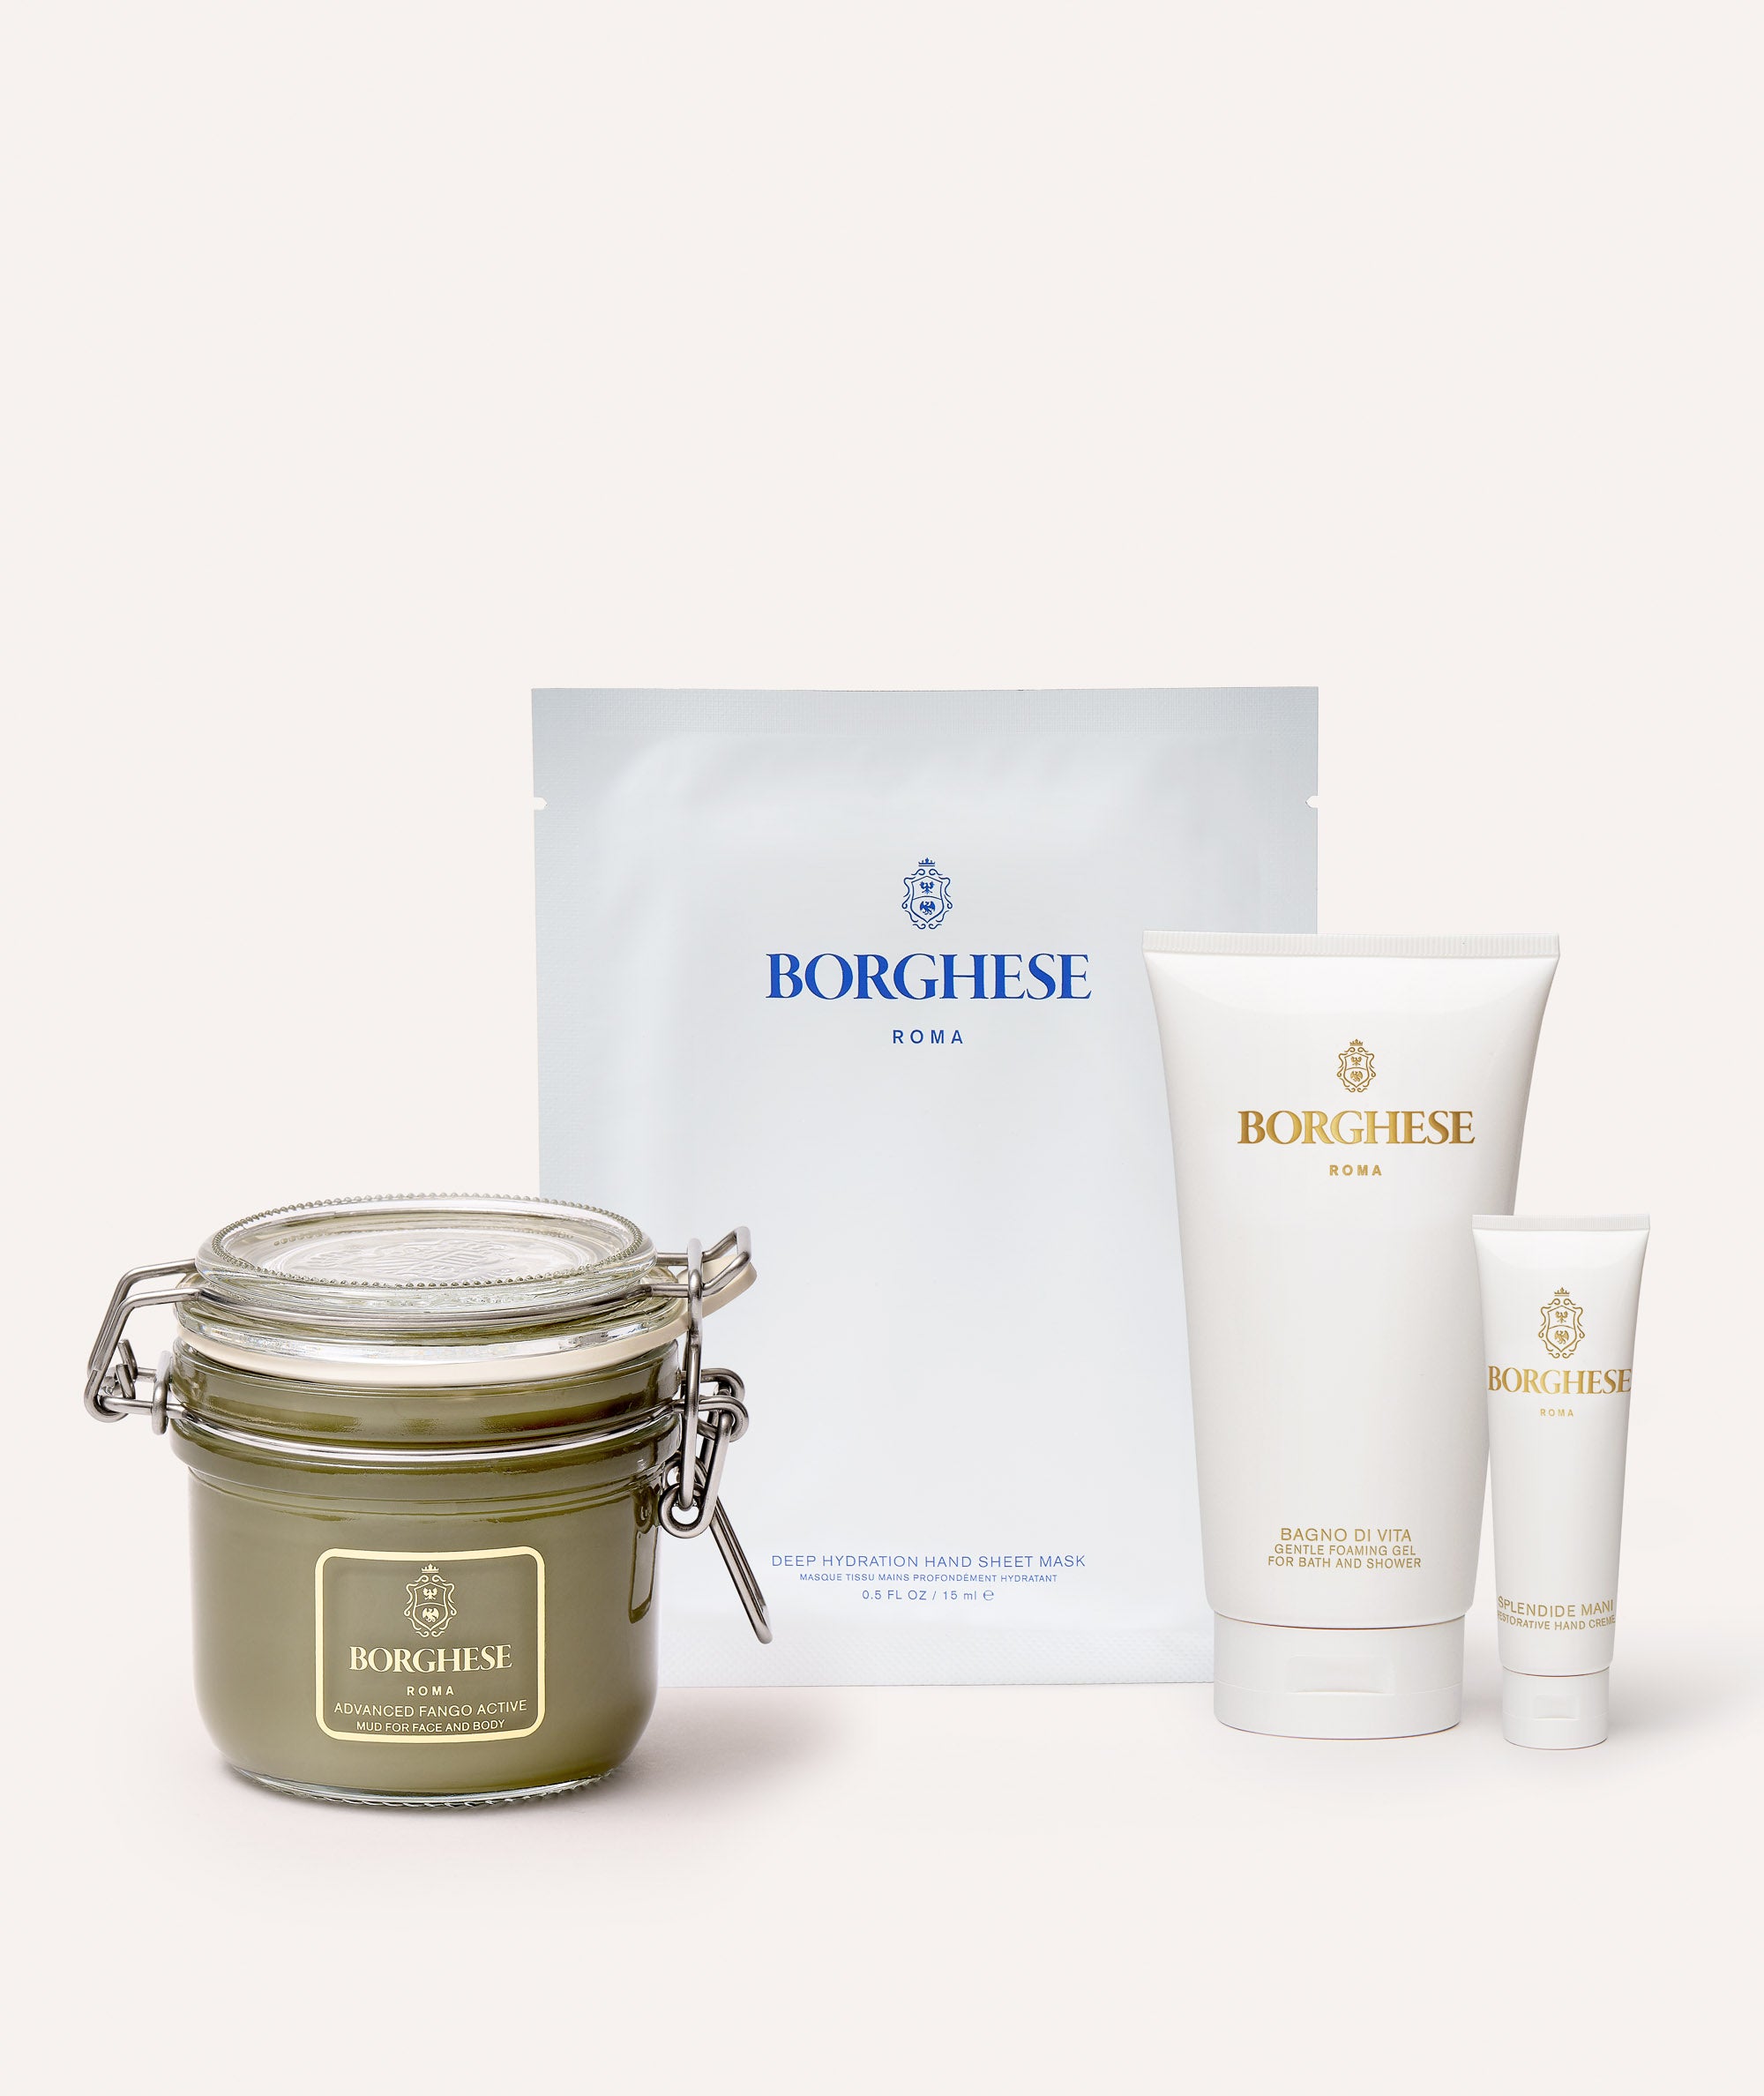 This is a picture of the contents of the Borghese 4 piece Body Care Solutions Gift Set